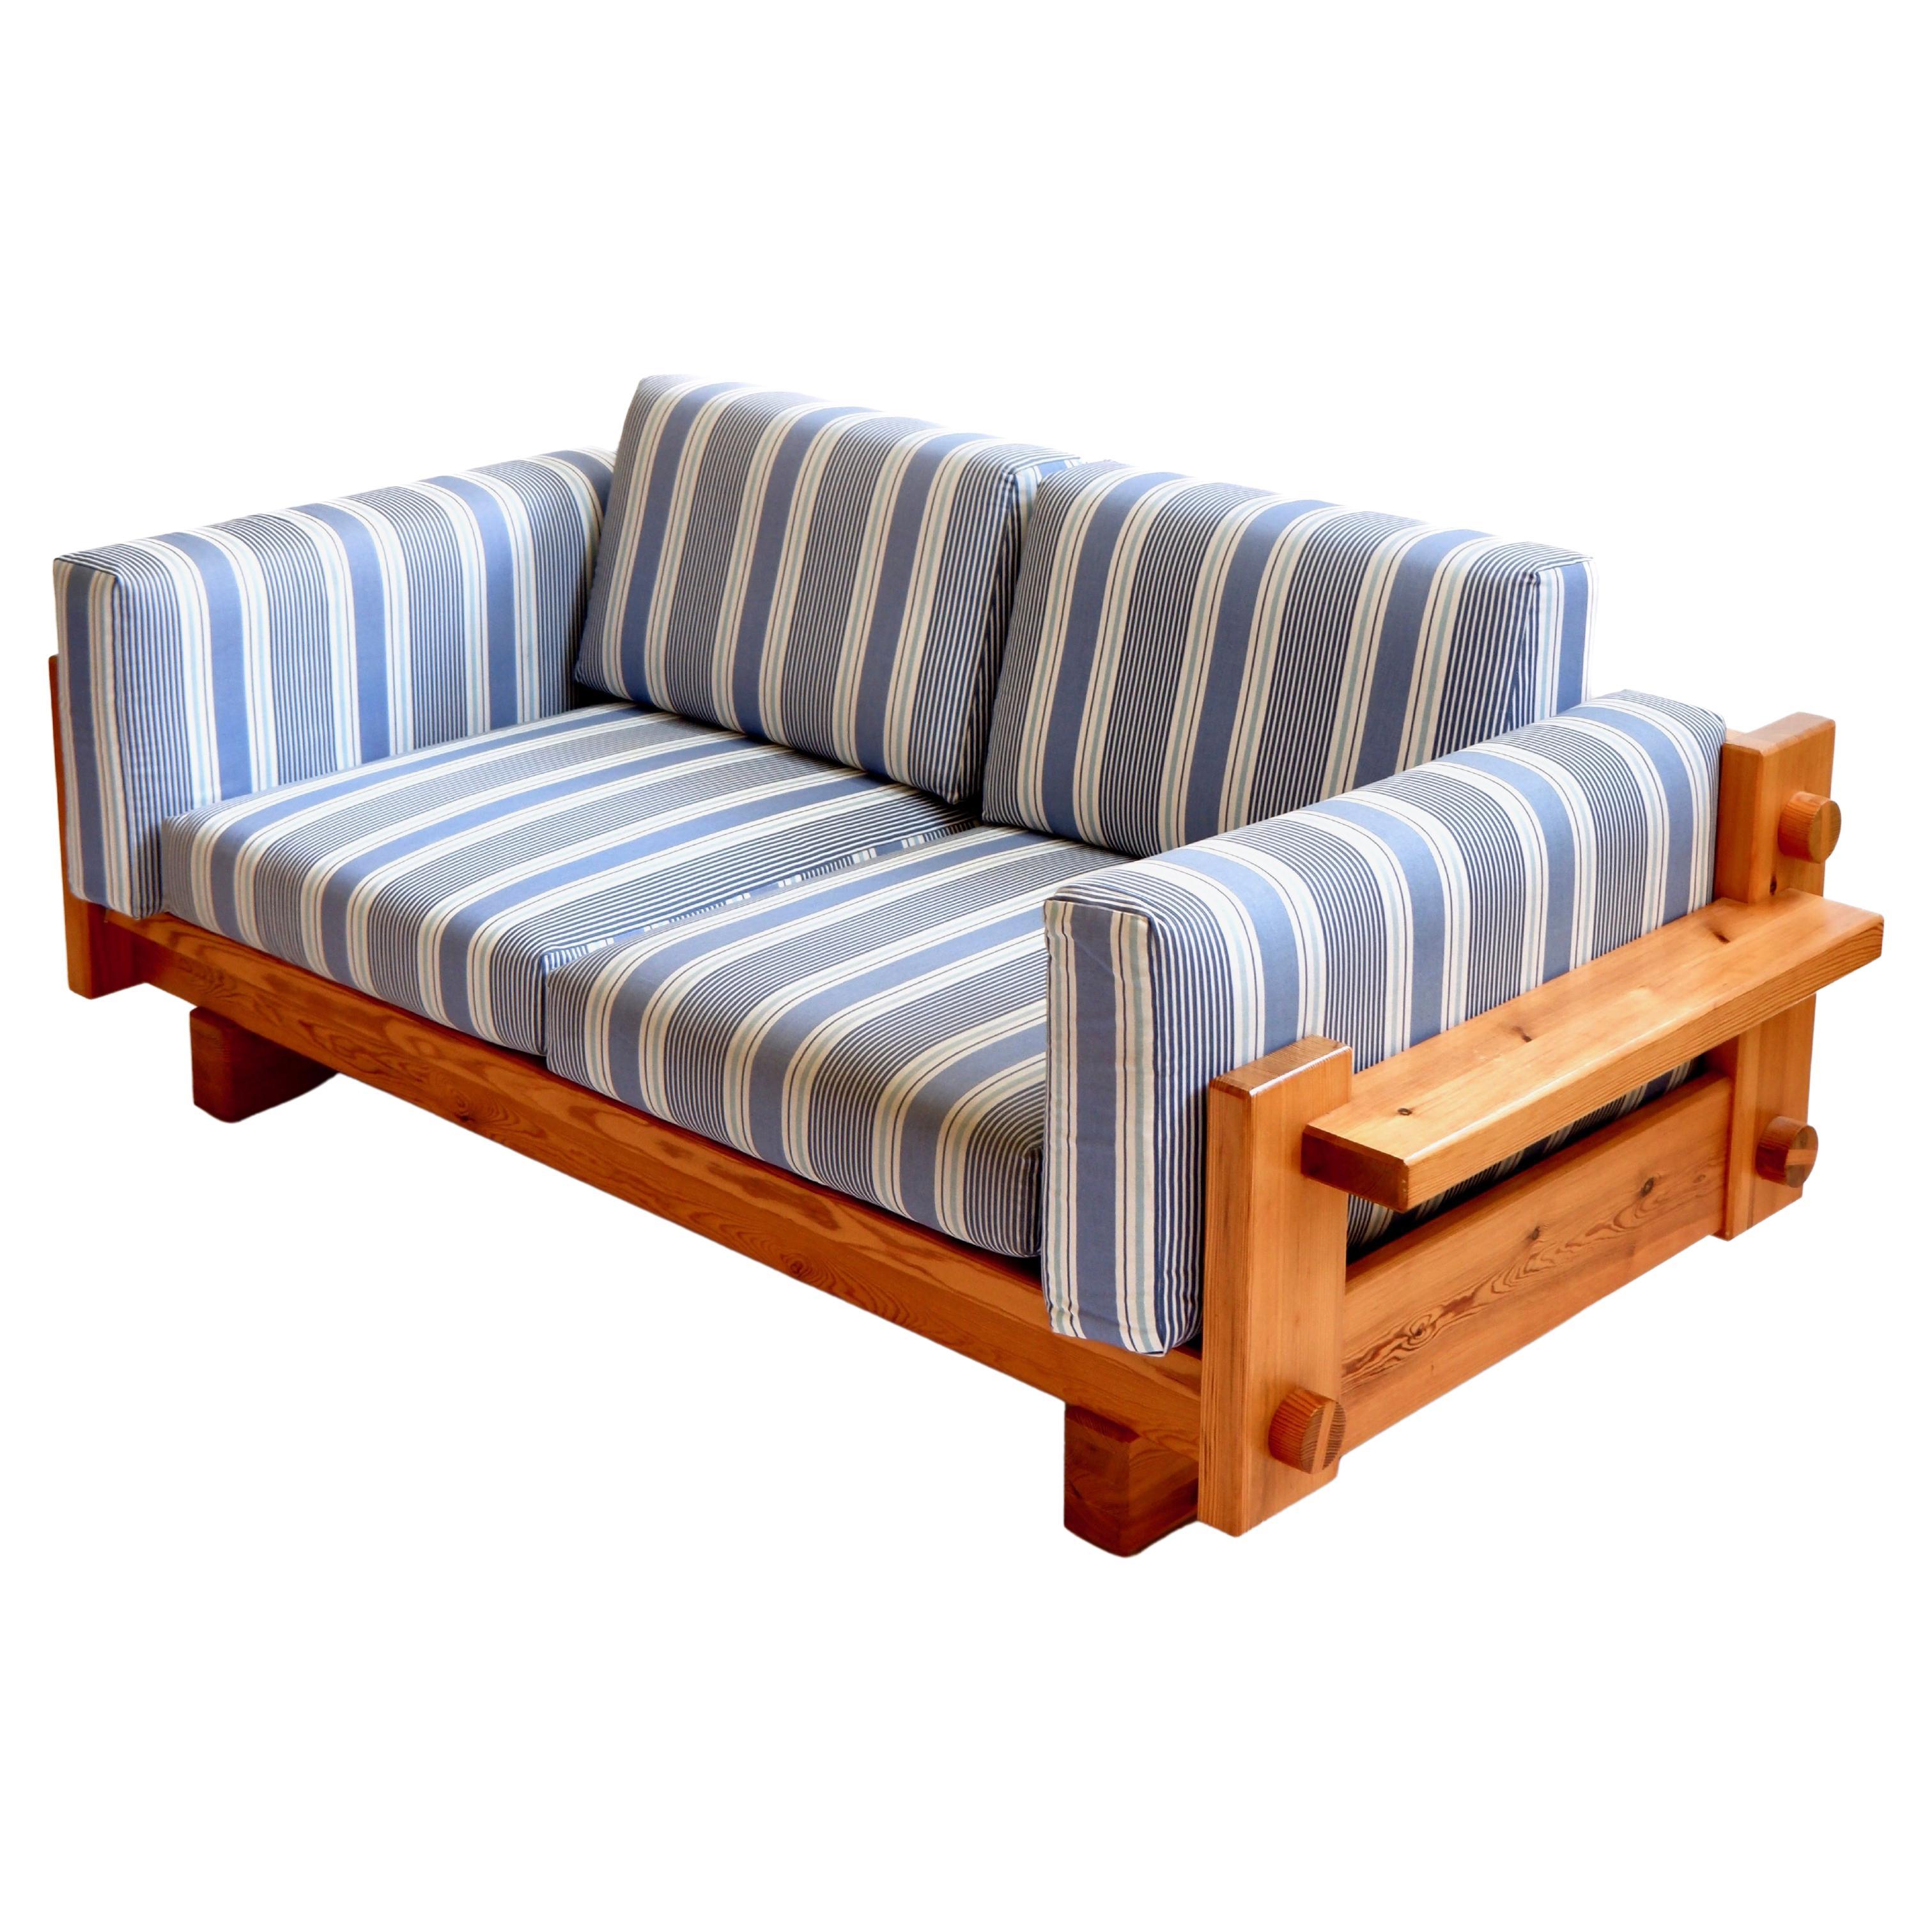 Rare sofa model Kontrapunkt designed by Yngve Ekström produced by Swedese Möbler AB in Sweden in the 70's. The sofa is a two to three sites couch made in solid pine and a stripe blue orginial fabric in really good condition. It has a really origianl